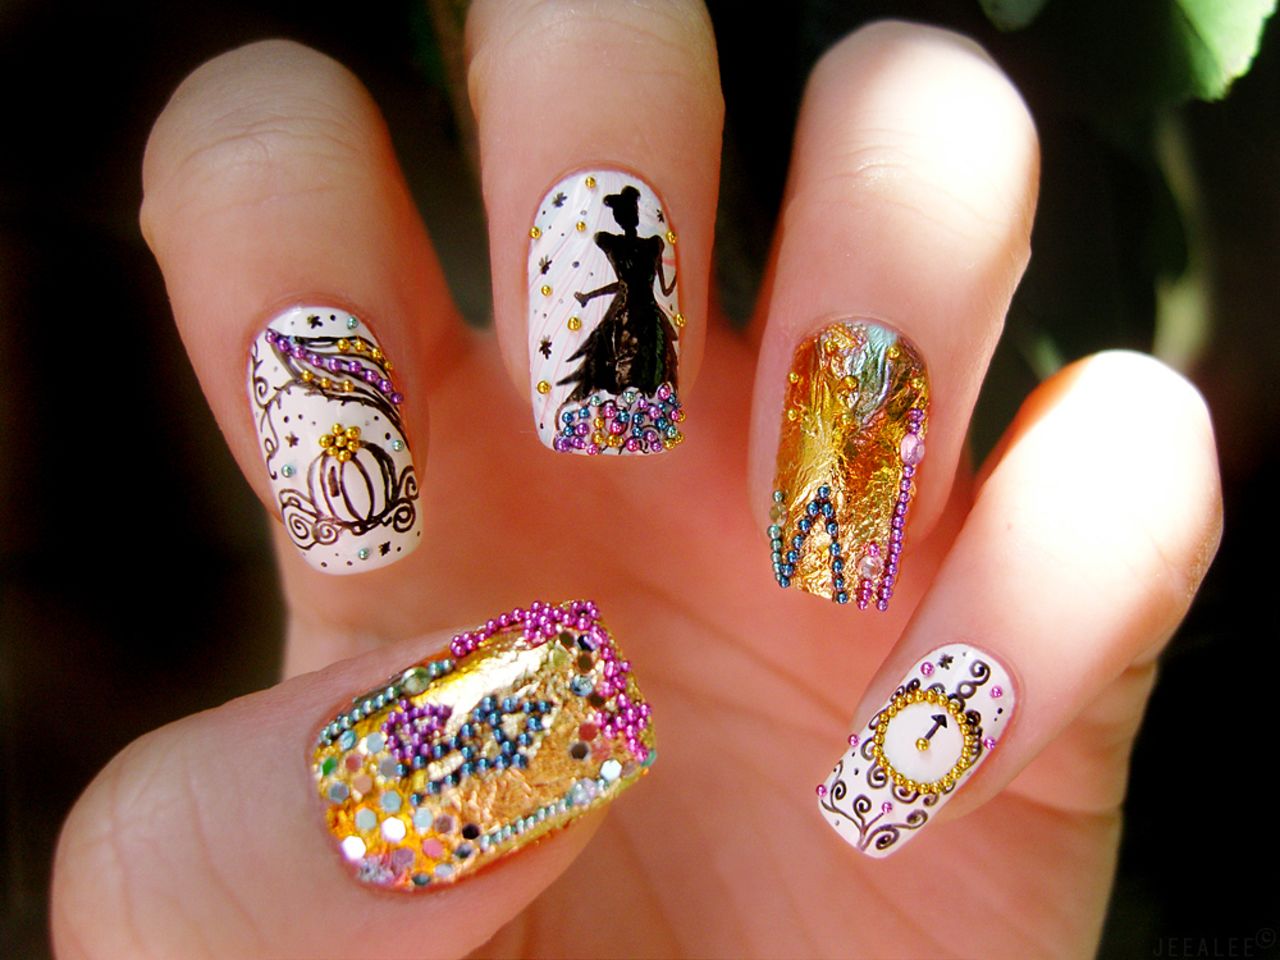 Nail art enjoys a huge following among DIYers like Stephanie Lee, a recent college graduate who sells her work on Etsy while looking for a job.